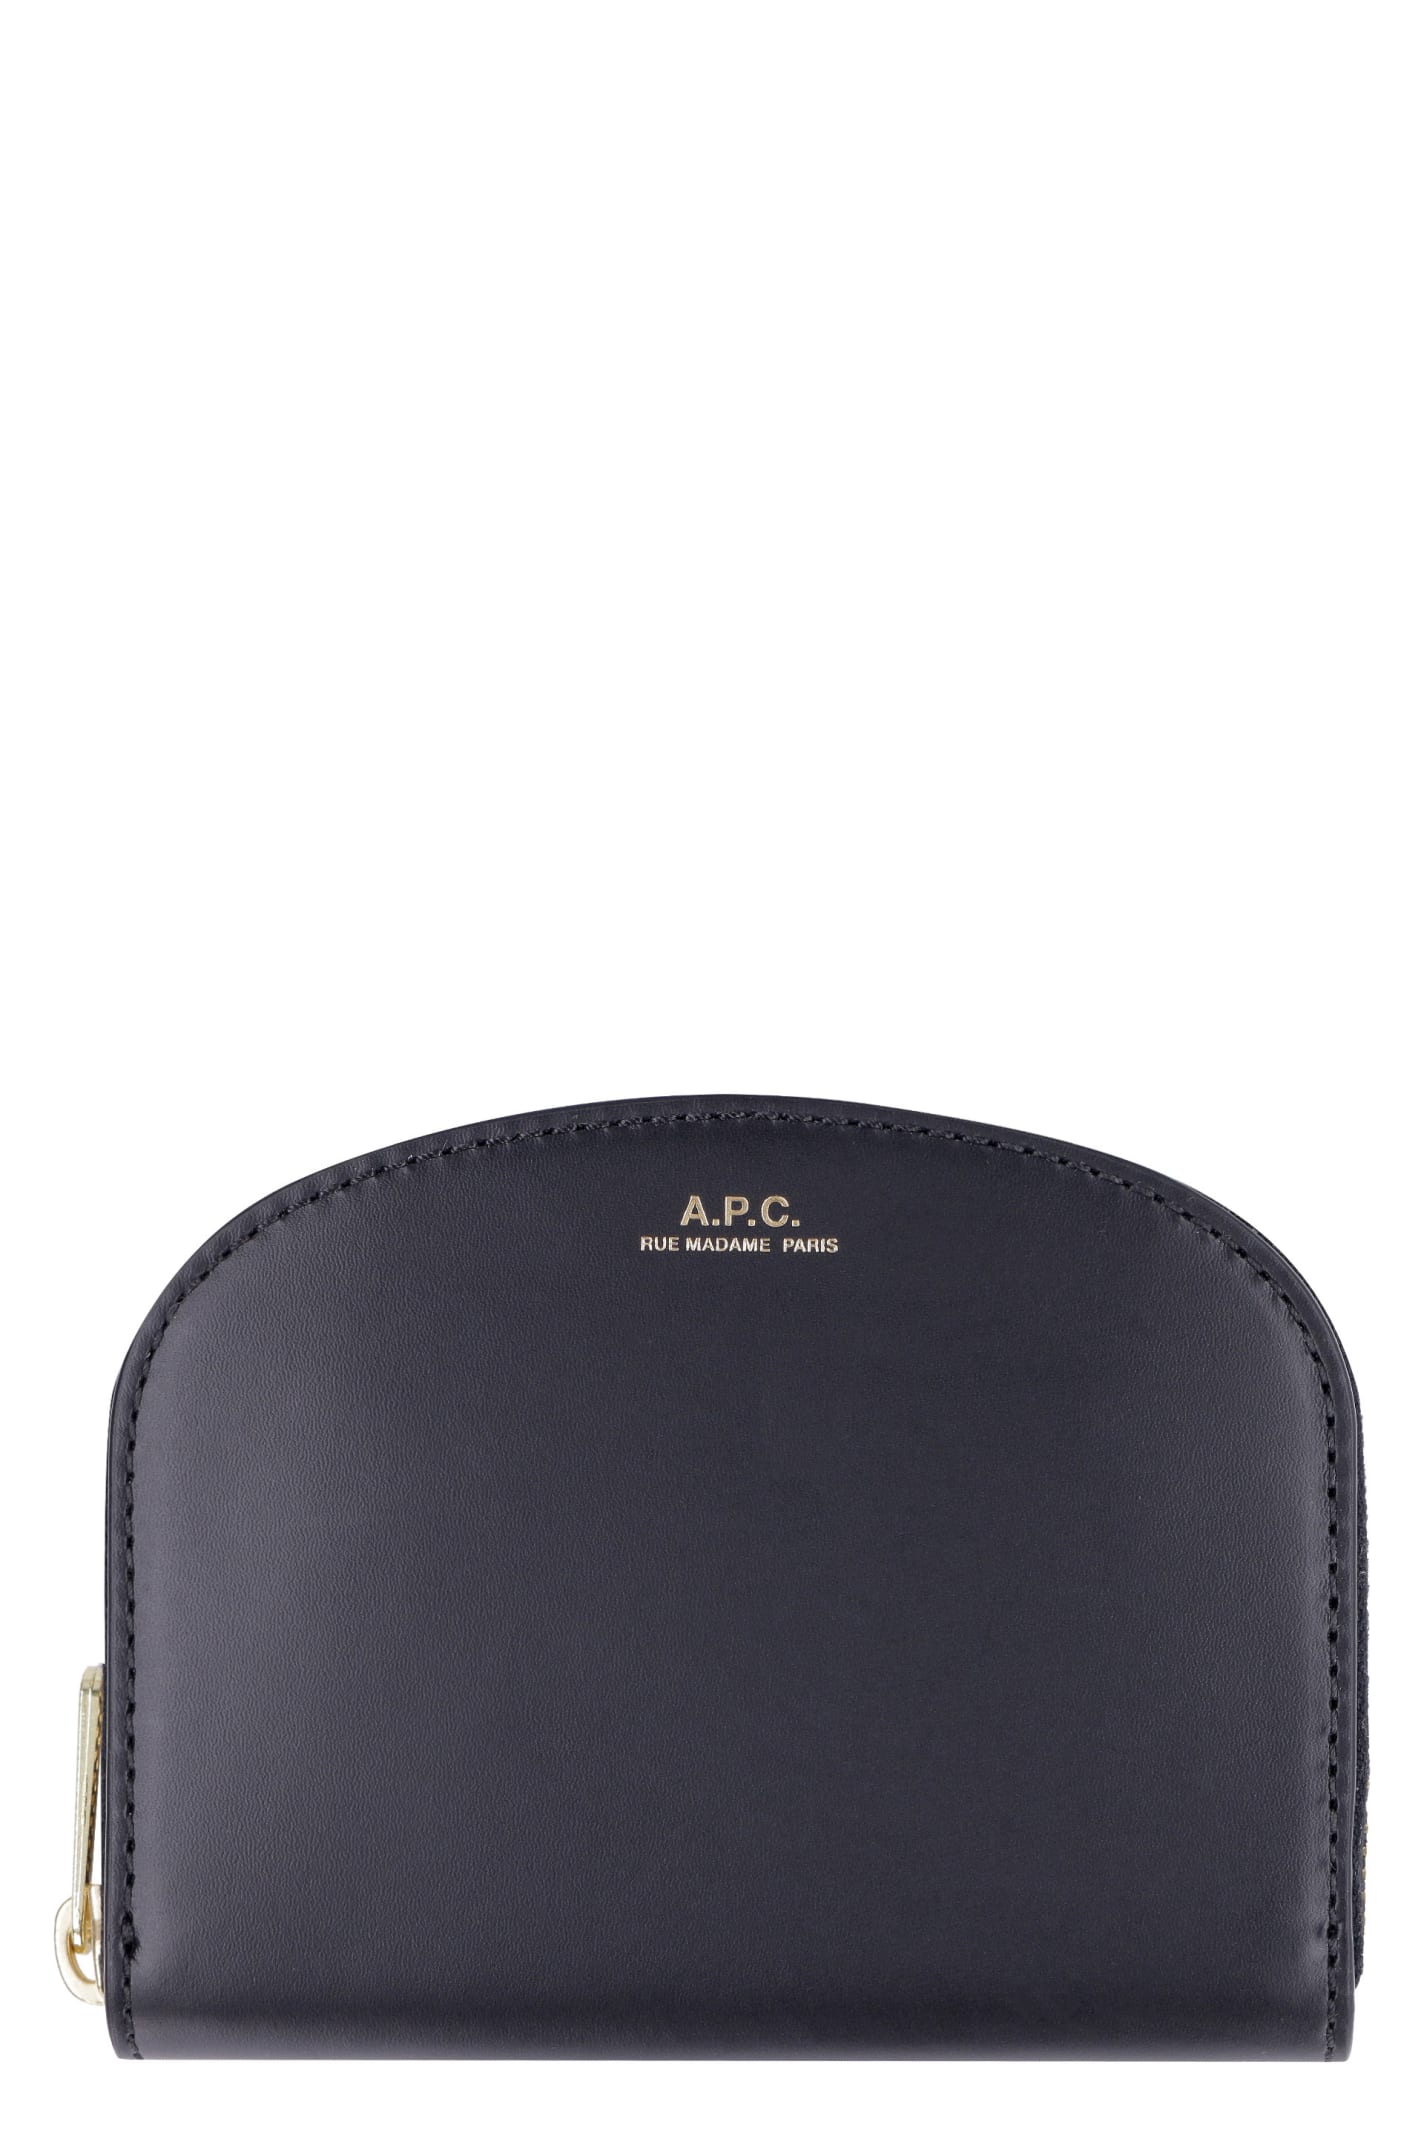 APC SMALL LEATHER FLAP-OVER WALLET